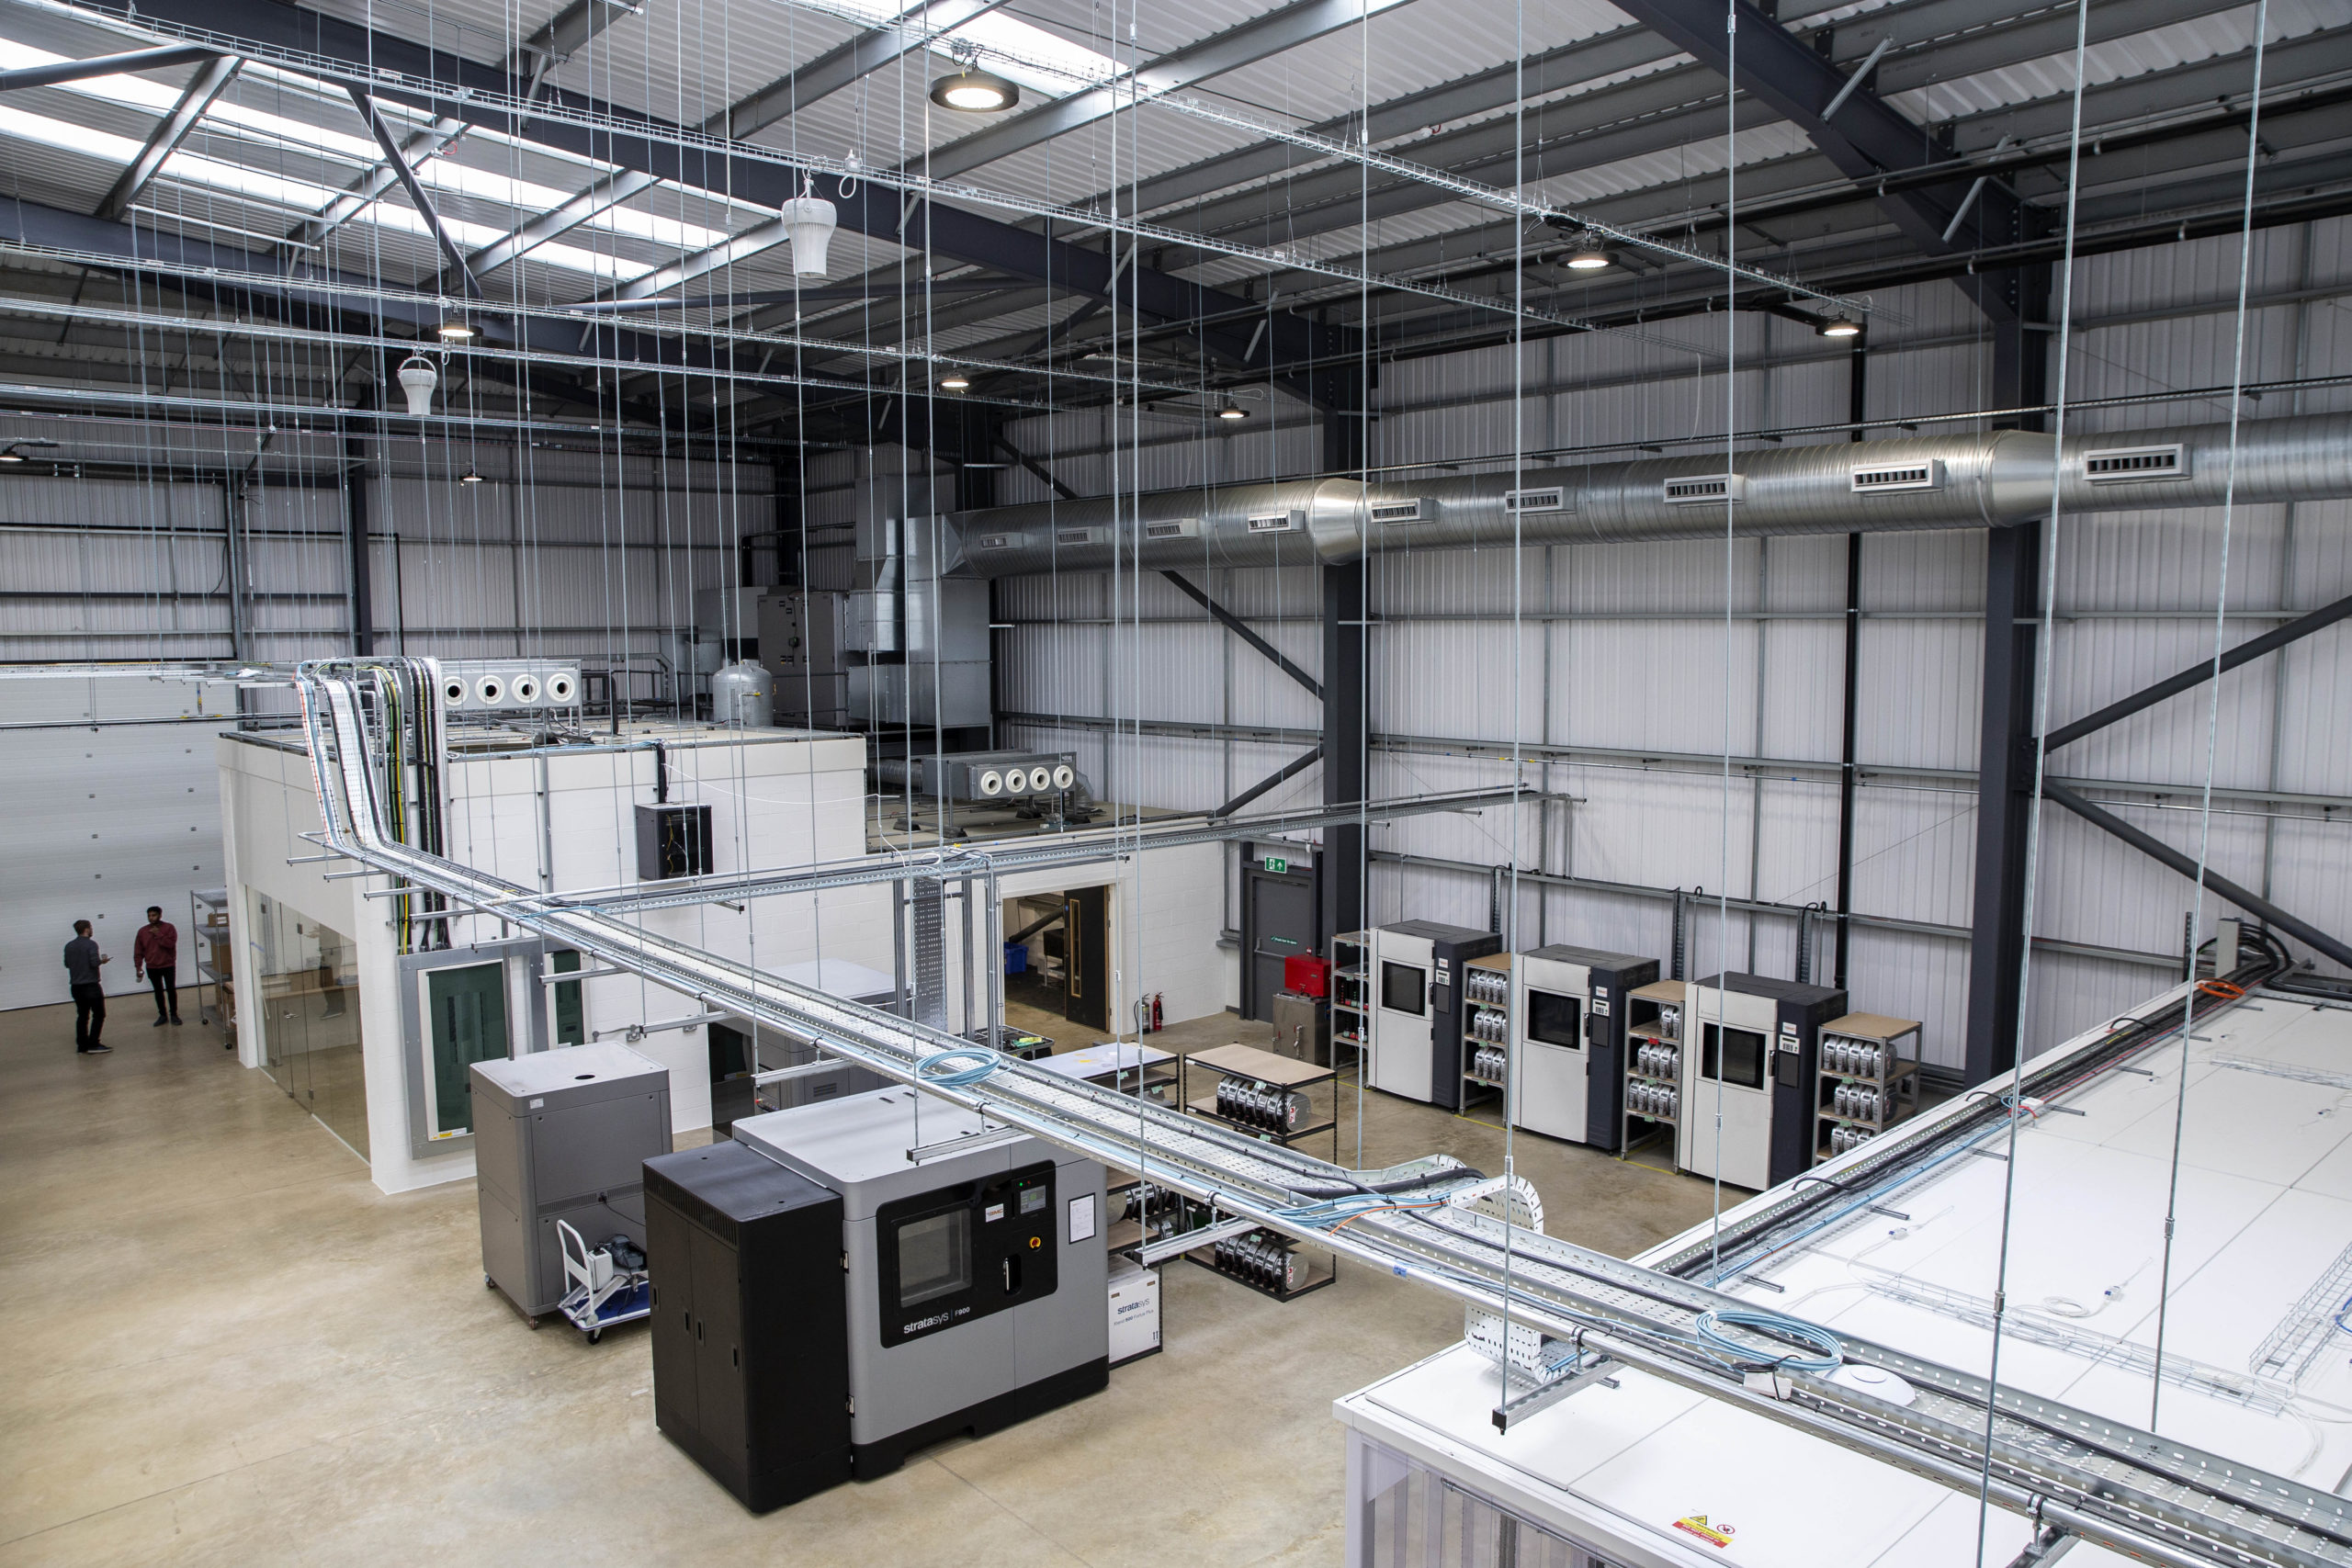 Interior of the new digital manufacturing facility in the UK.